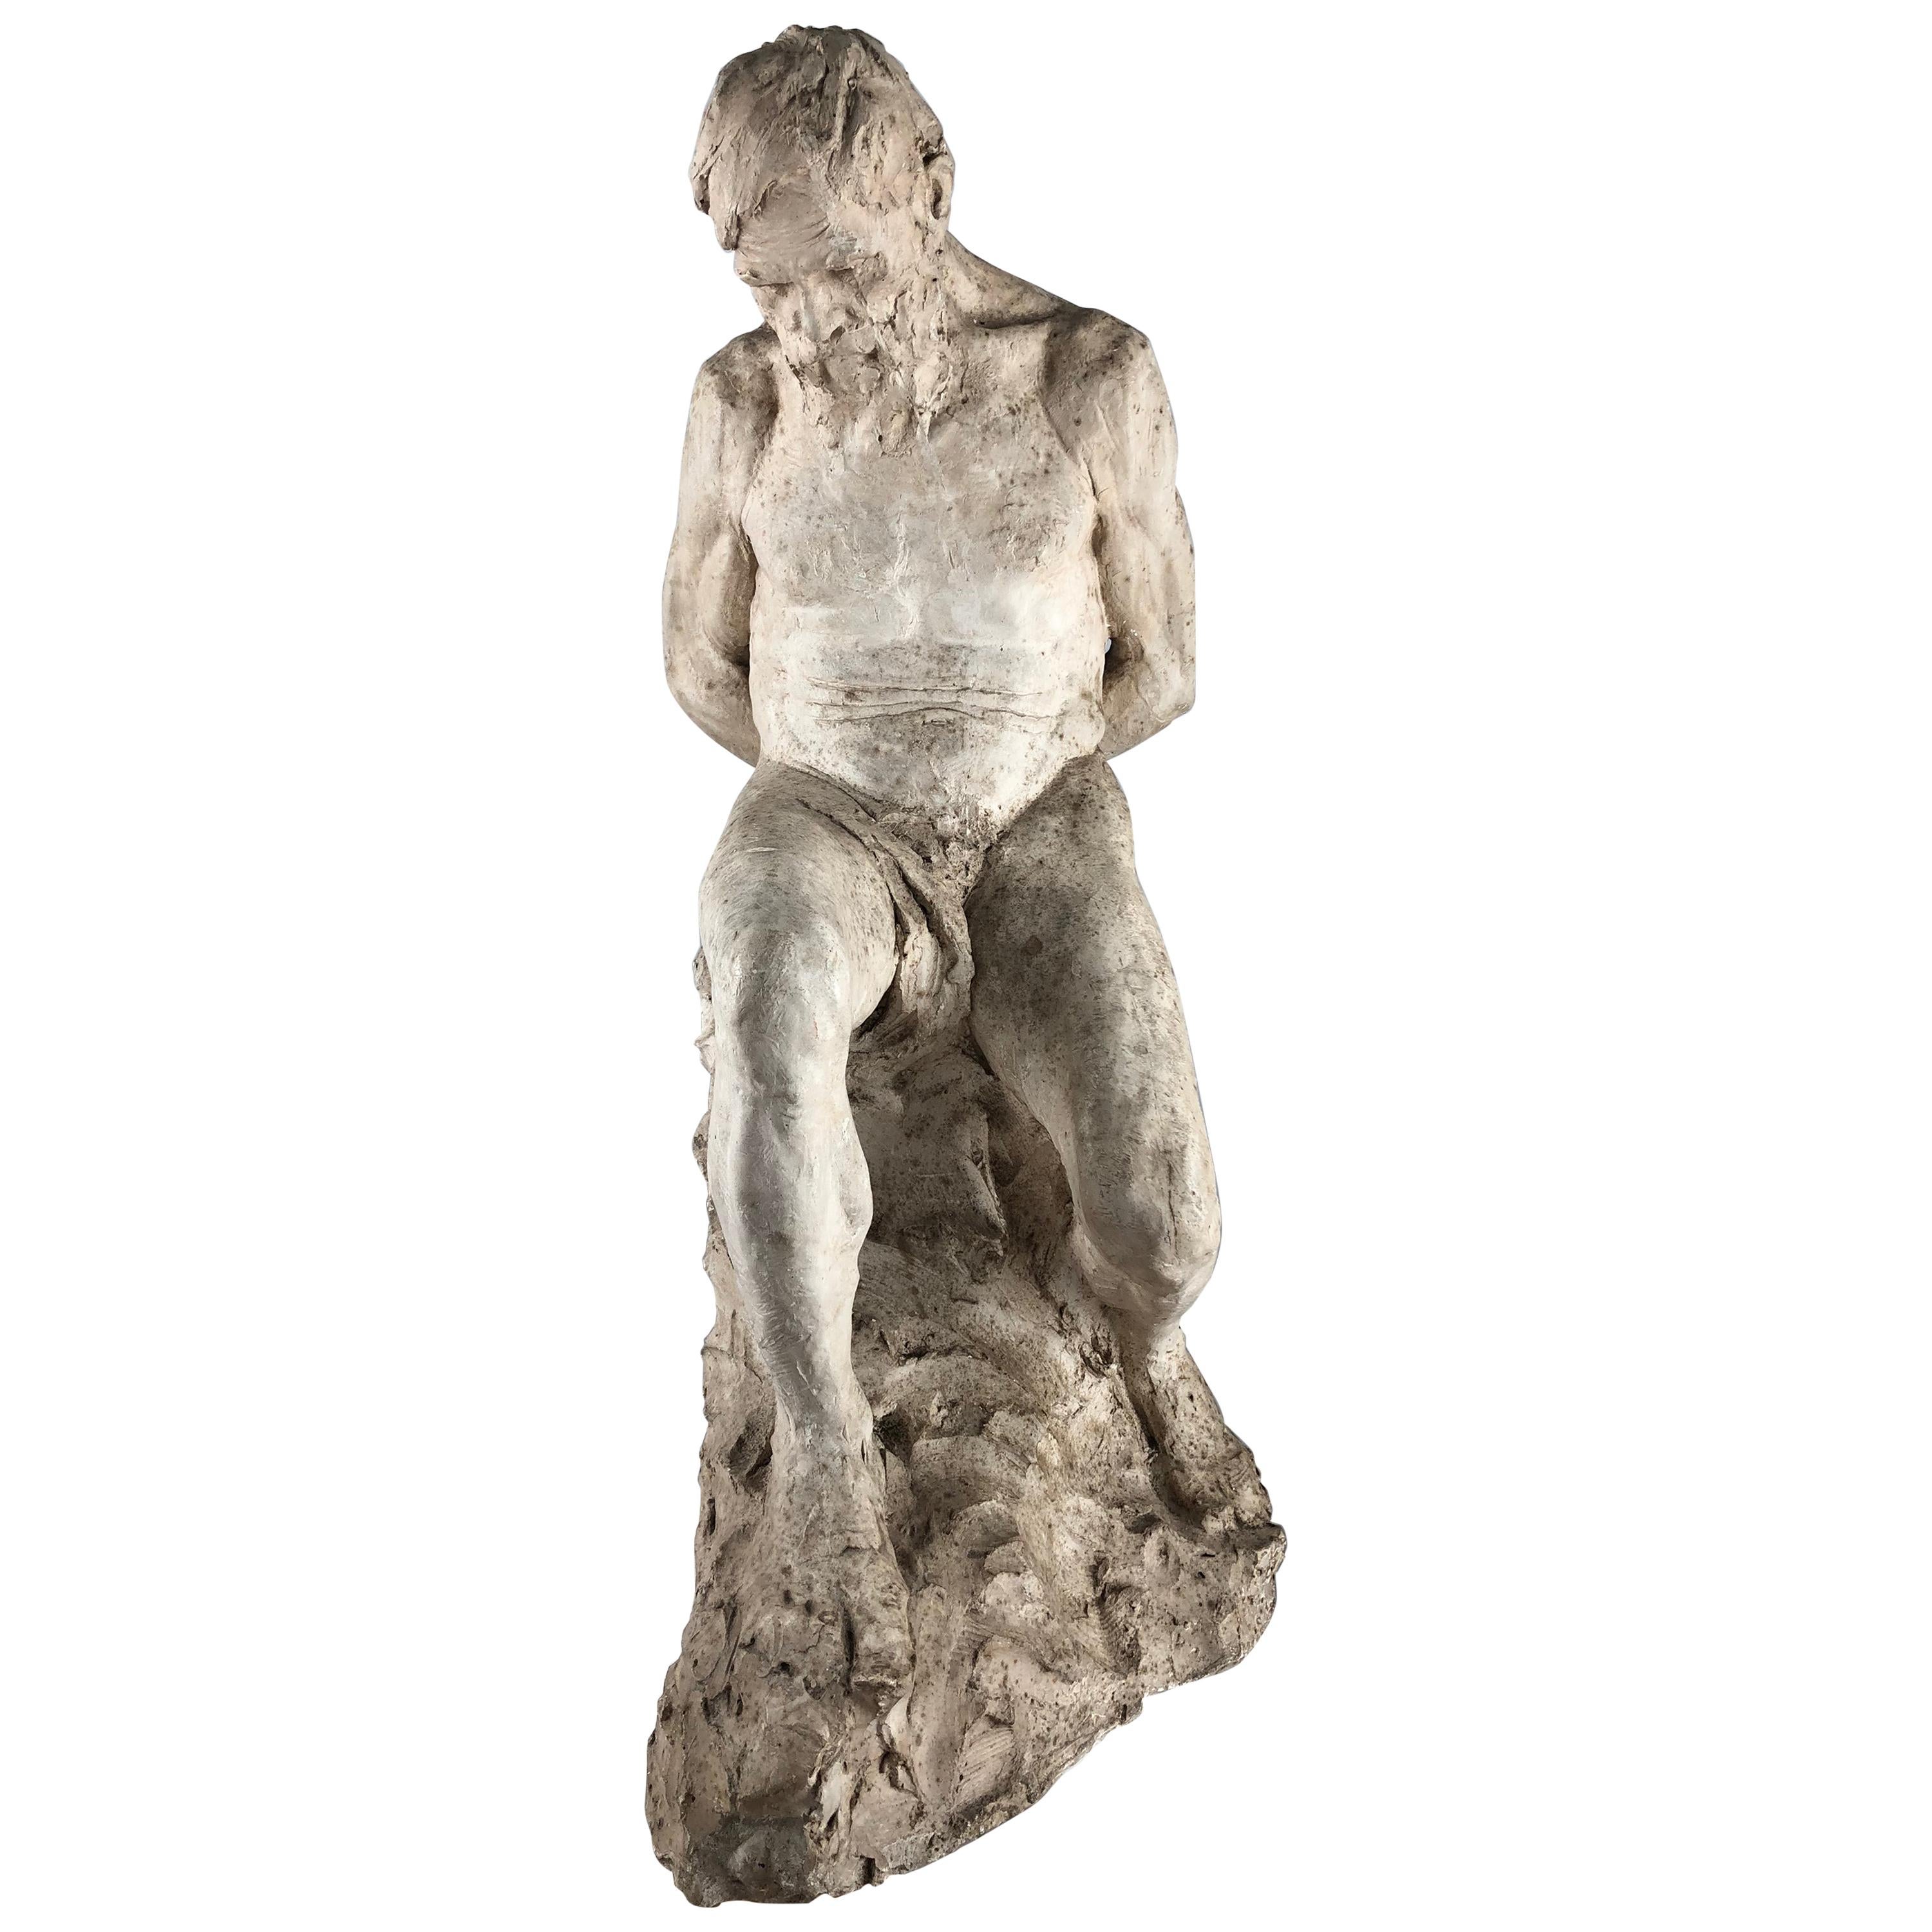 Sculpture of Plaster, signed Gallé and dated -93 (1893)